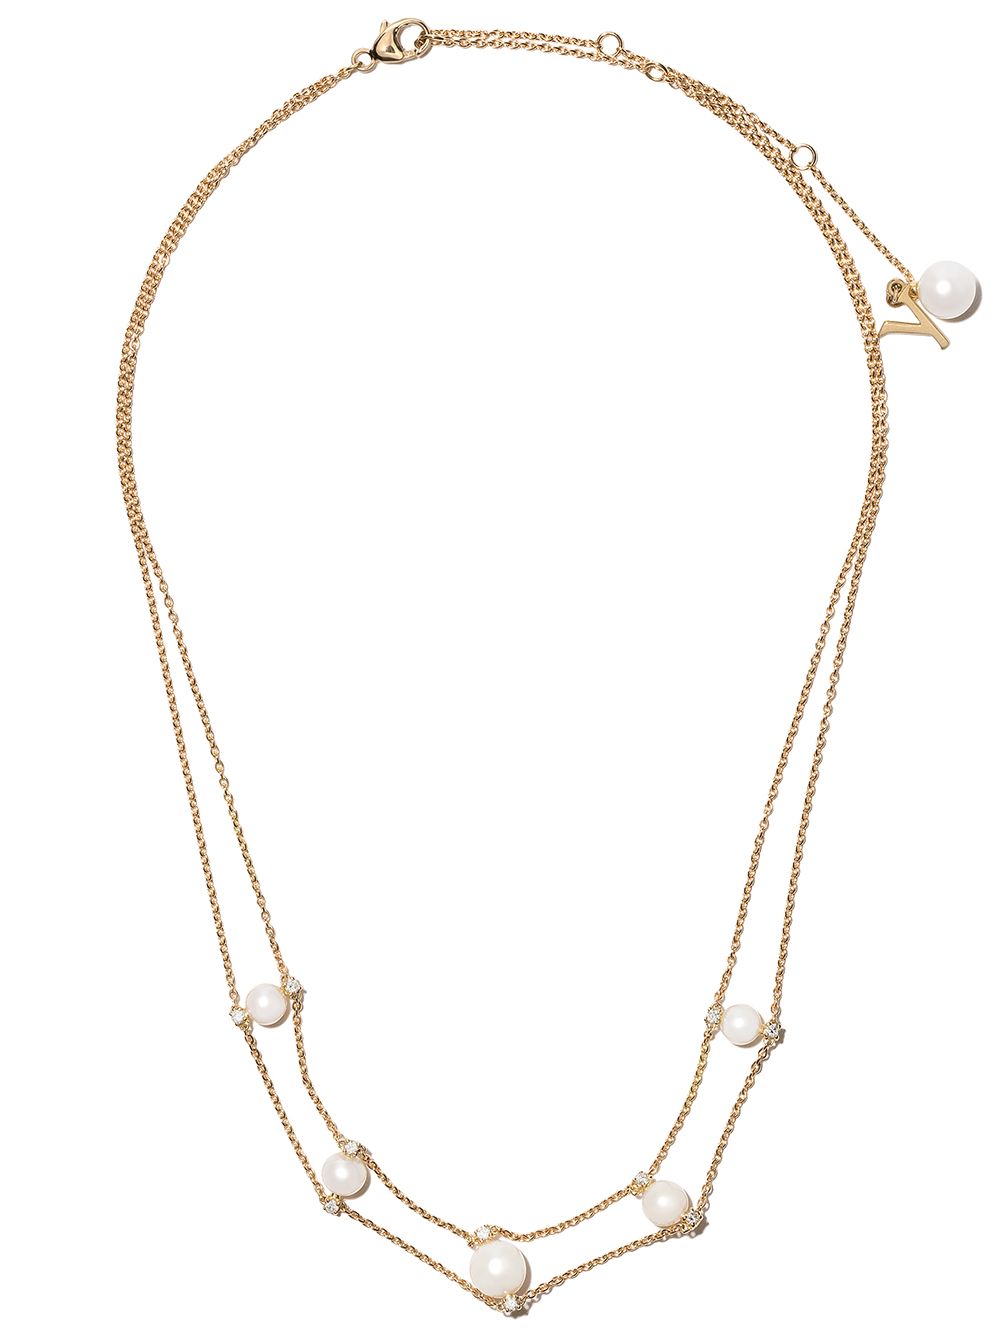 Image 1 of Yoko London 18kt yellow gold Trend Freshwater pearl and diamond necklace